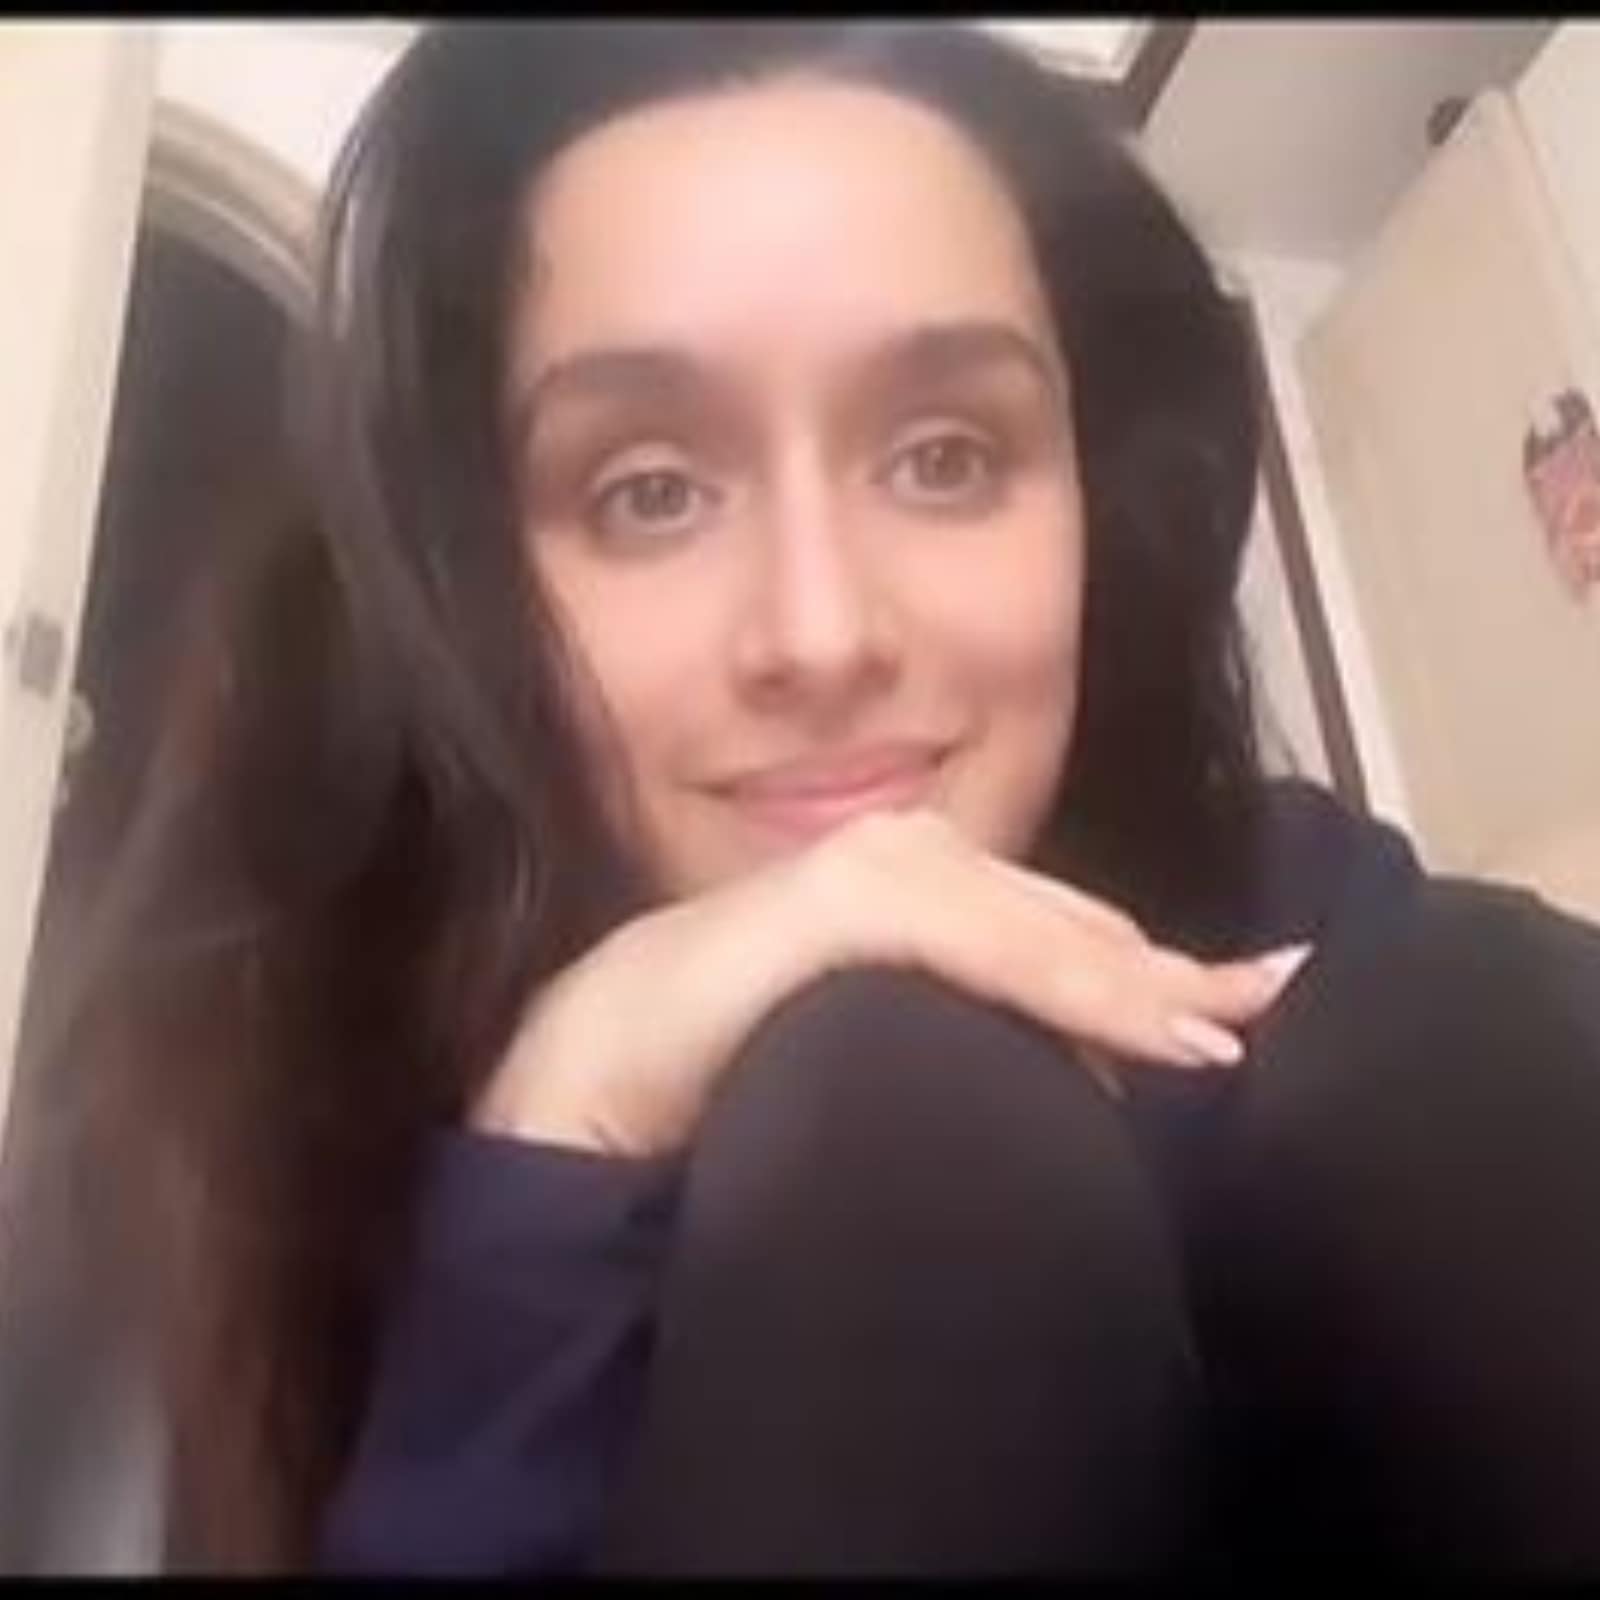 Shraddha Kapoor Xxx Porn Short Video - Shraddha Kapoor Sings BTS X Coldplay's My Universe for Her Dog in This  Adorable Instagram Video, Watch - News18